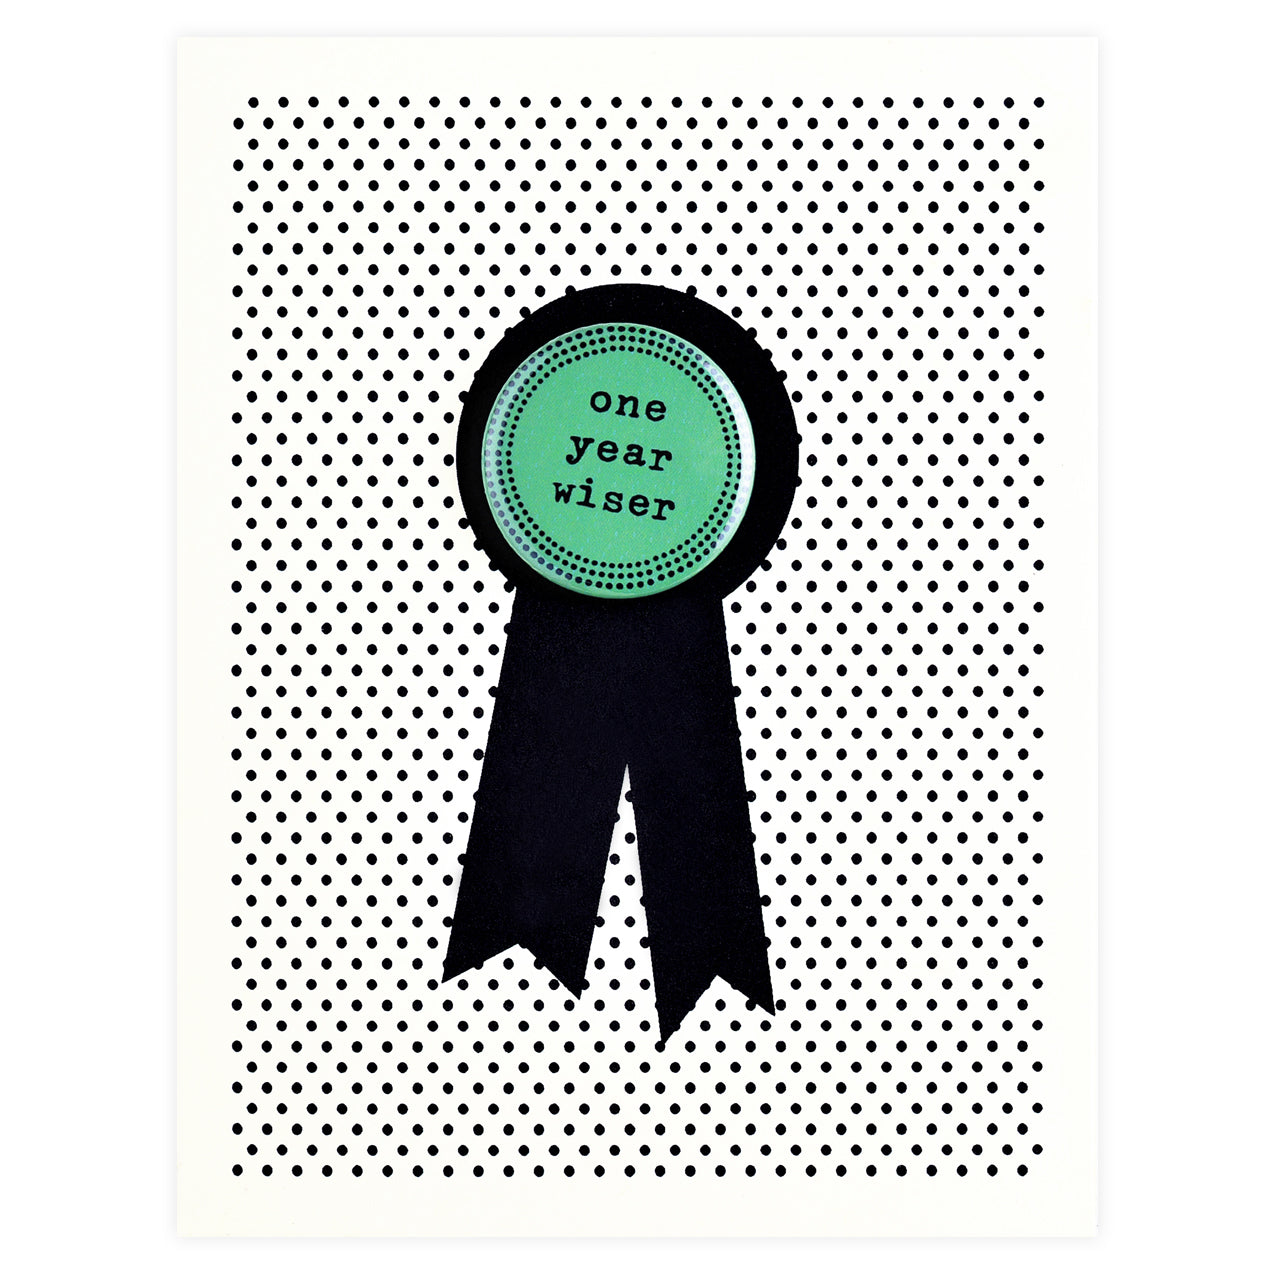 Regional Assembly of Text One Year Wiser Button Pin Birthday Card 